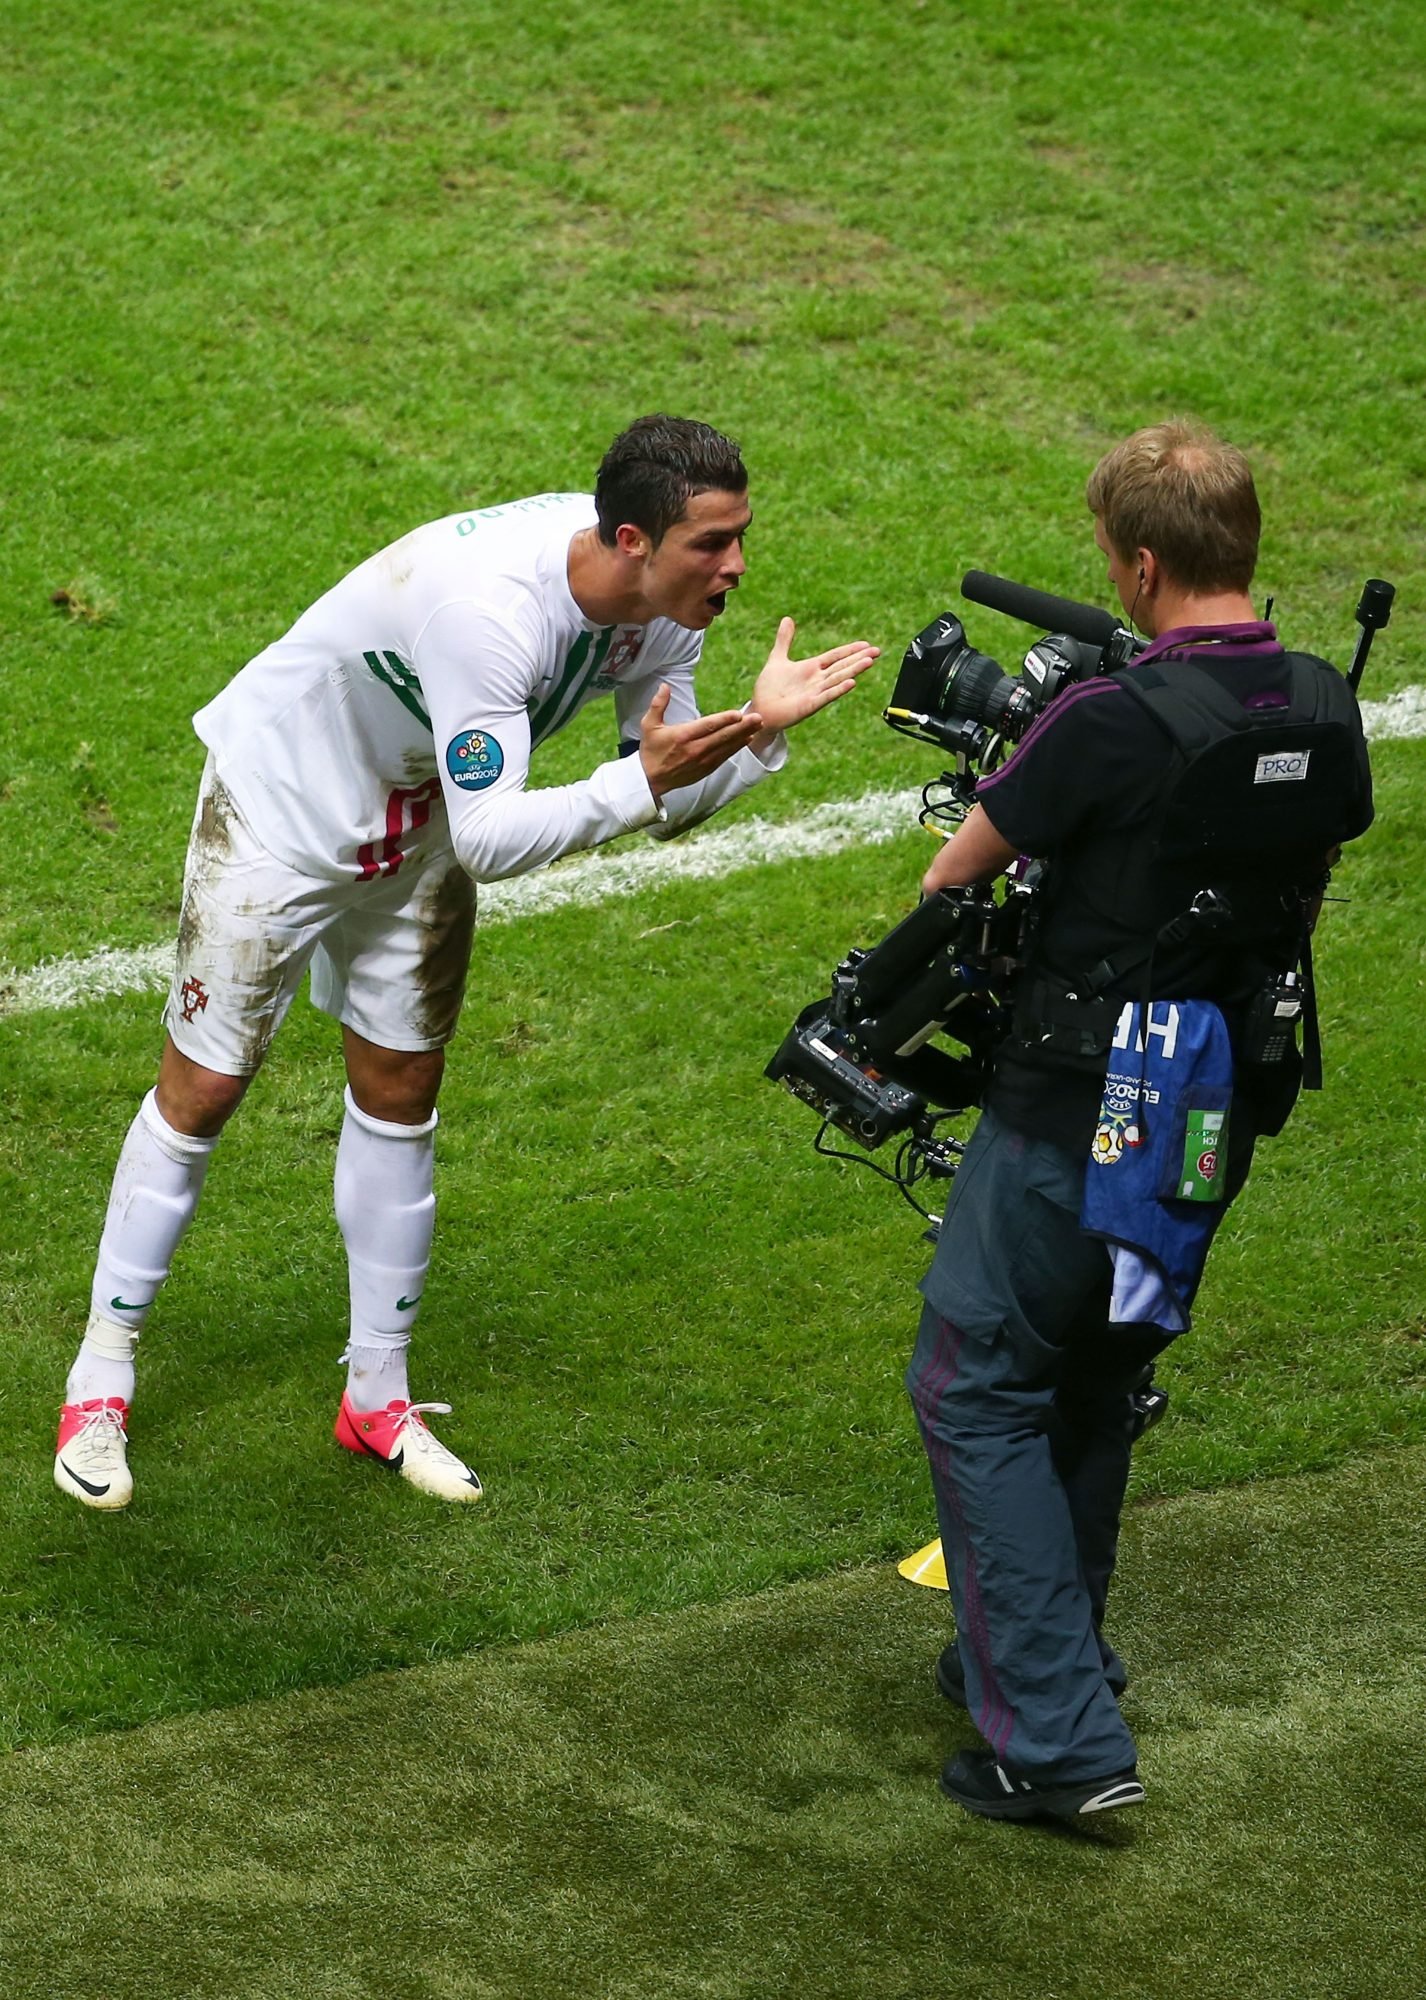 WARSAW, POLAND - JUNE 21: Cristiano Ronaldo of Portugal celebrates scoring the opening goal into a TV camera during the UEFA EURO 2012 quarter final match between Czech Republic and Portugal at The National Stadium on June 21, 2012 in Warsaw, Poland. (Photo by Michael Steele/Getty Images)